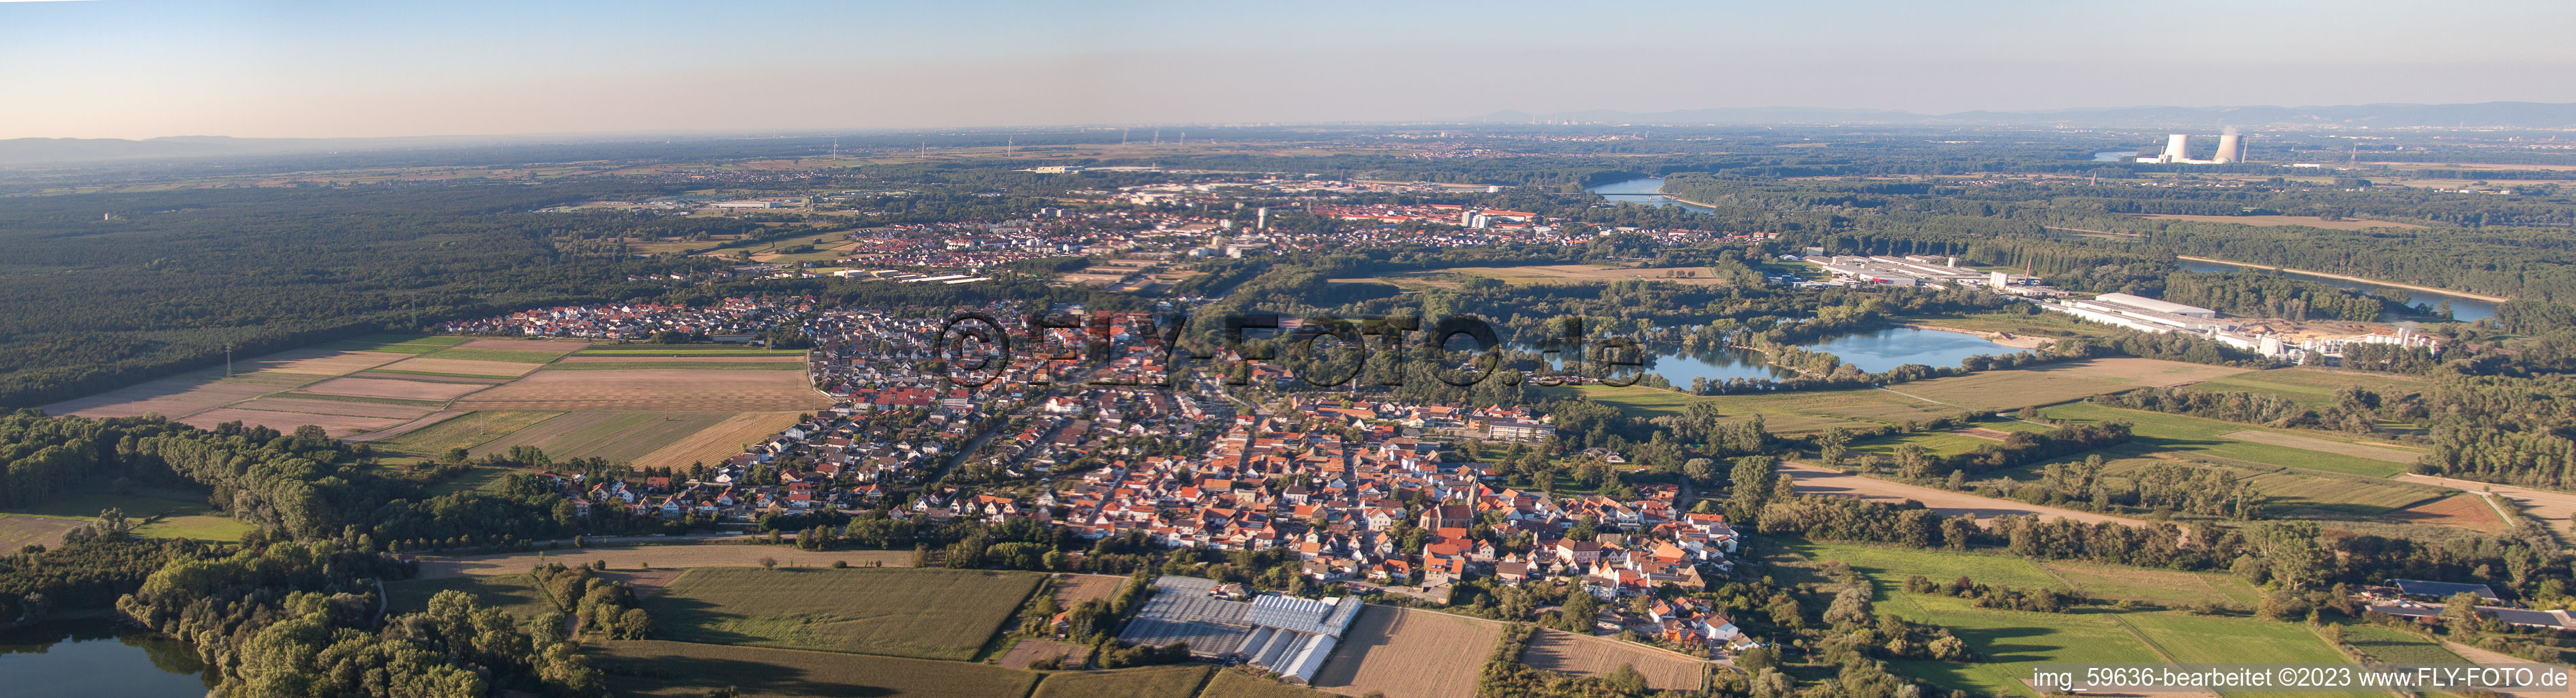 Aerial view of Panorama in Germersheim in the state Rhineland-Palatinate, Germany